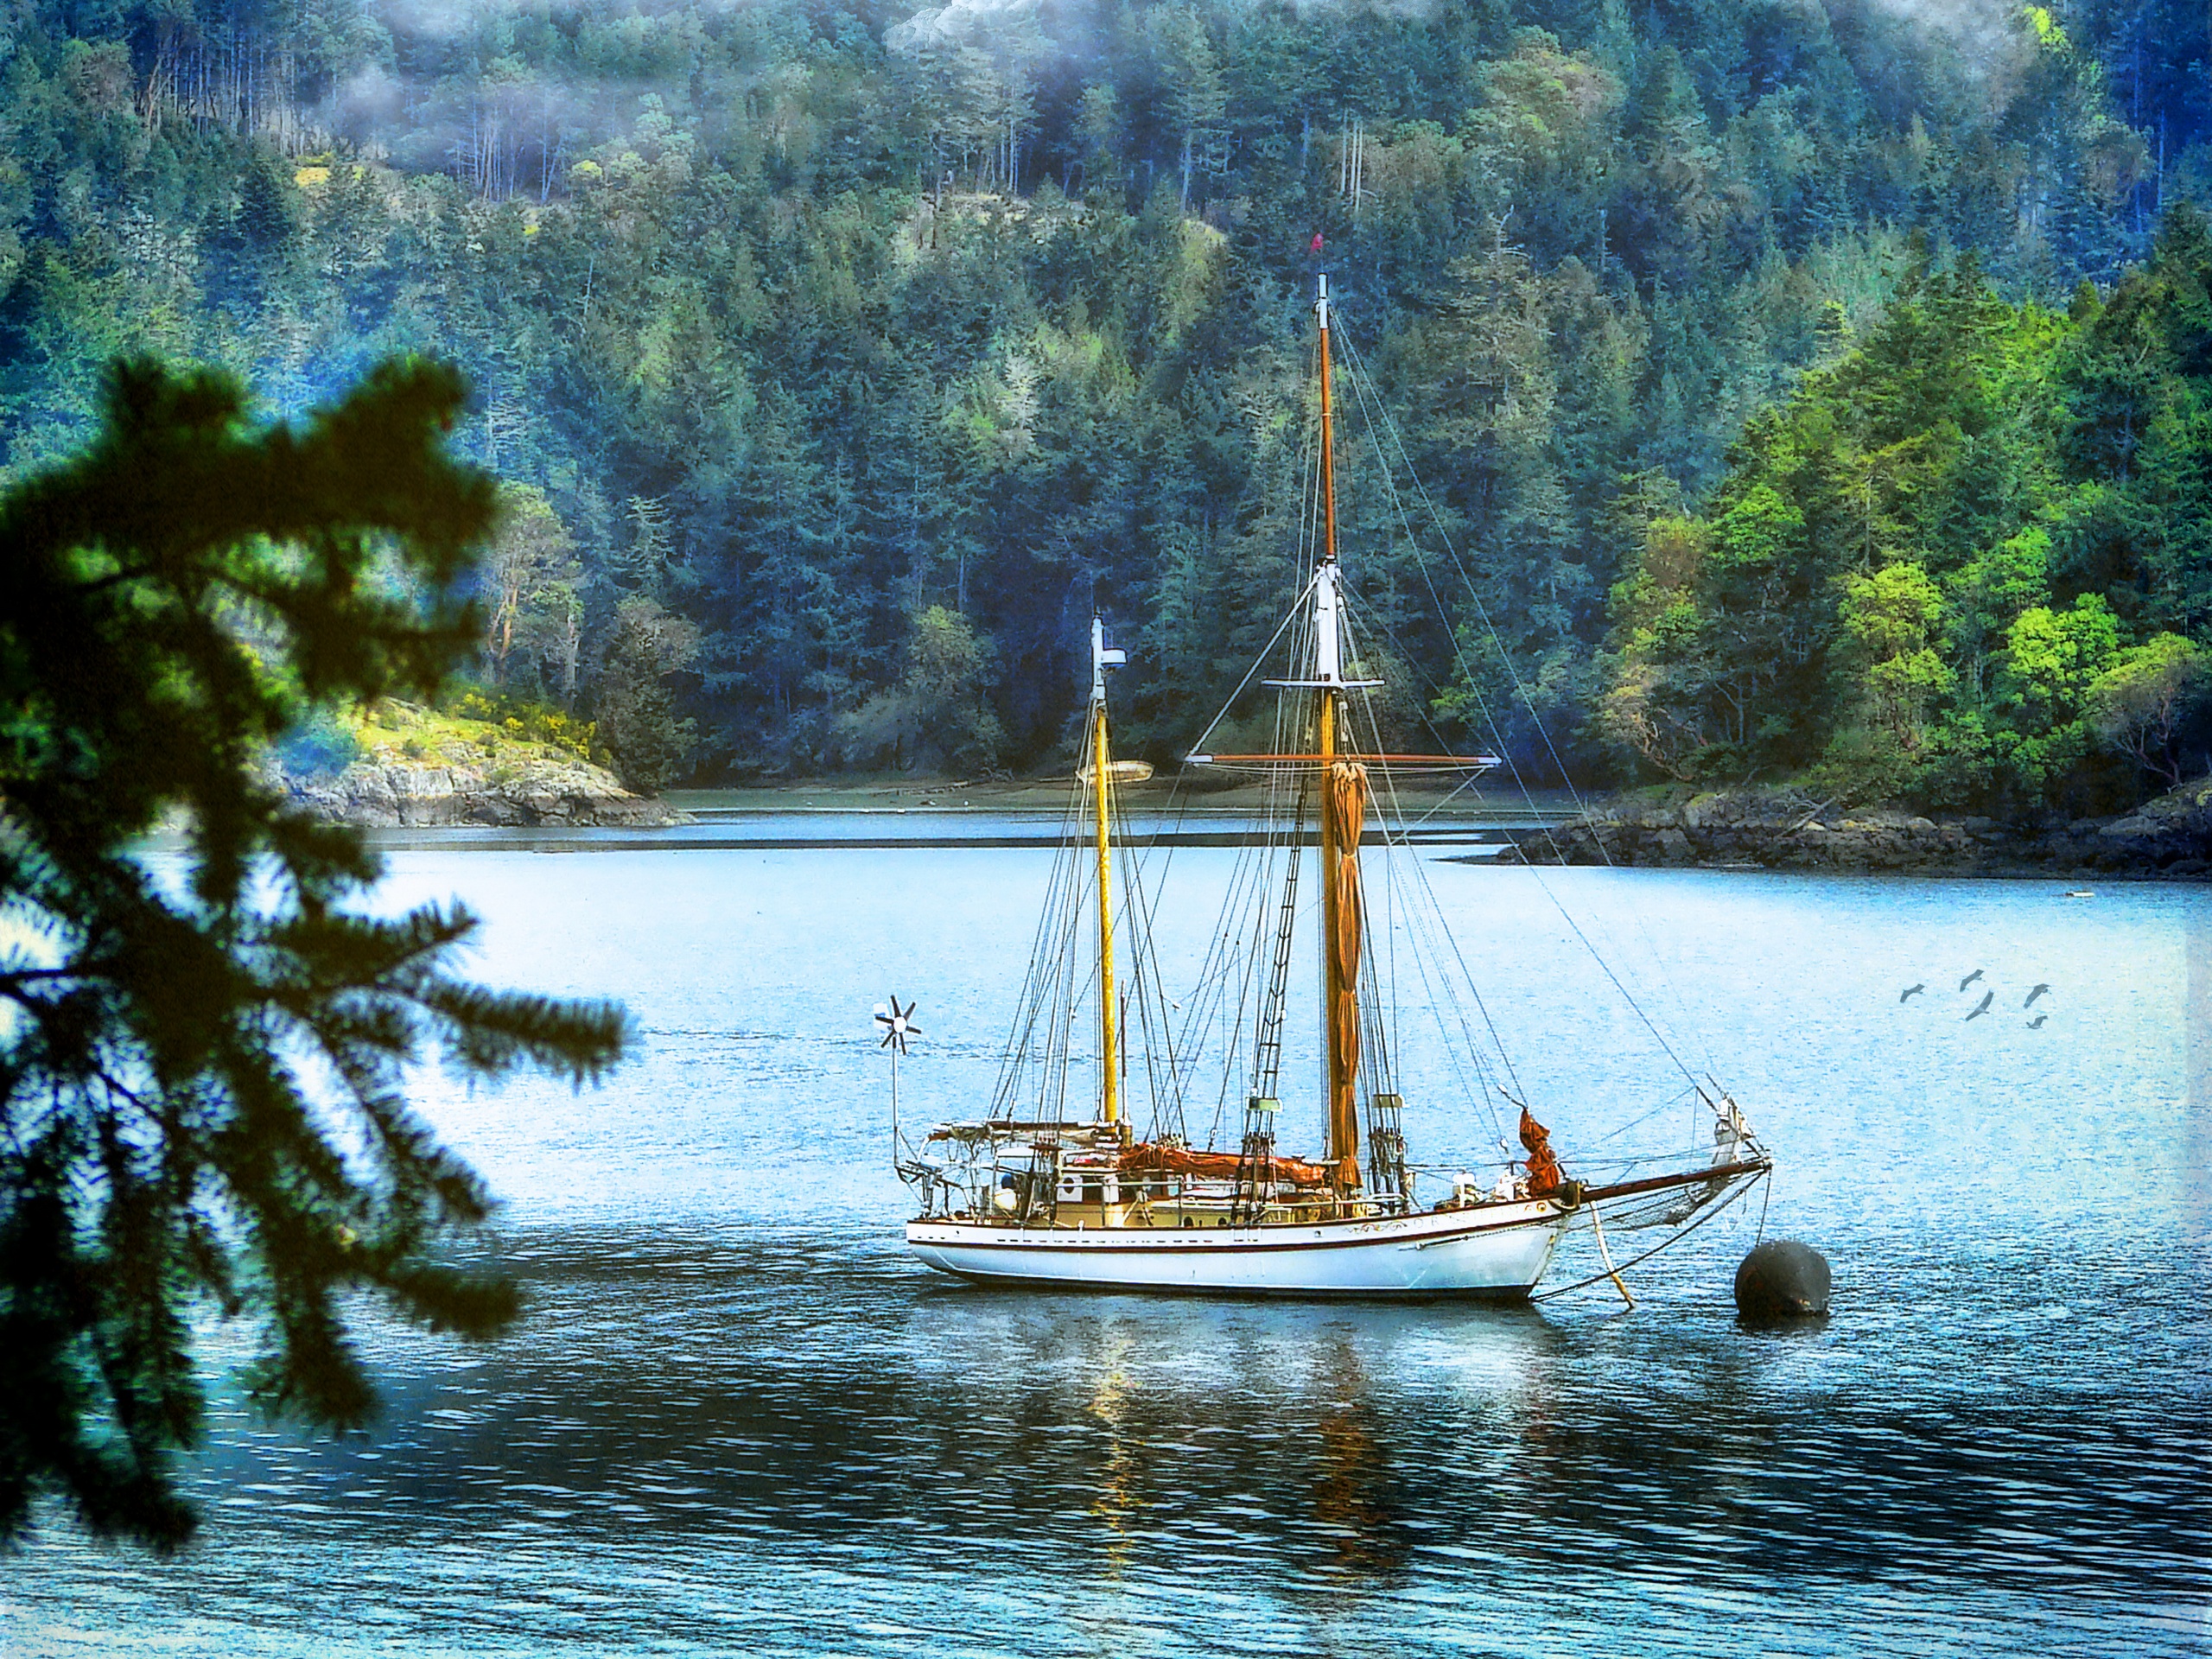 green, forest, photography, hdr, boat, lake, sailboat